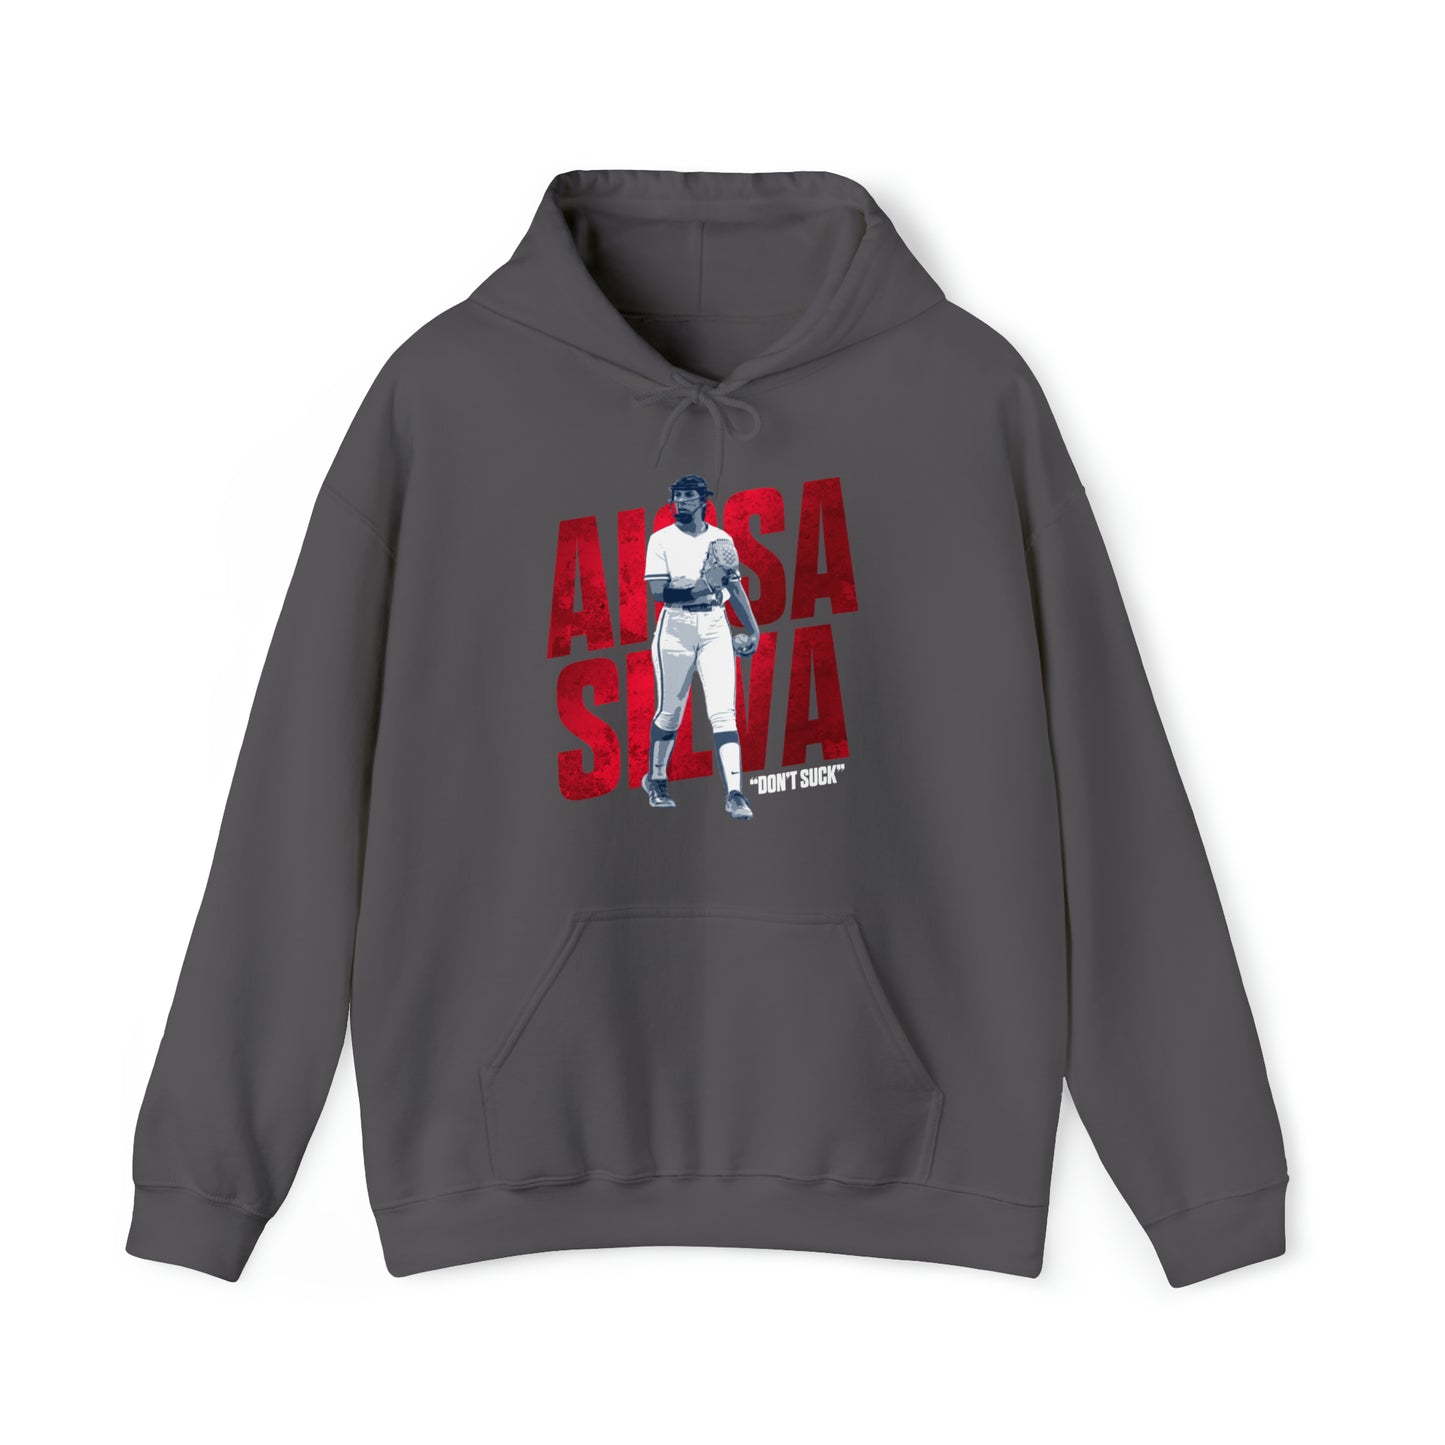 Aissa Silva: Turn The Negatives To Positives Hoodie